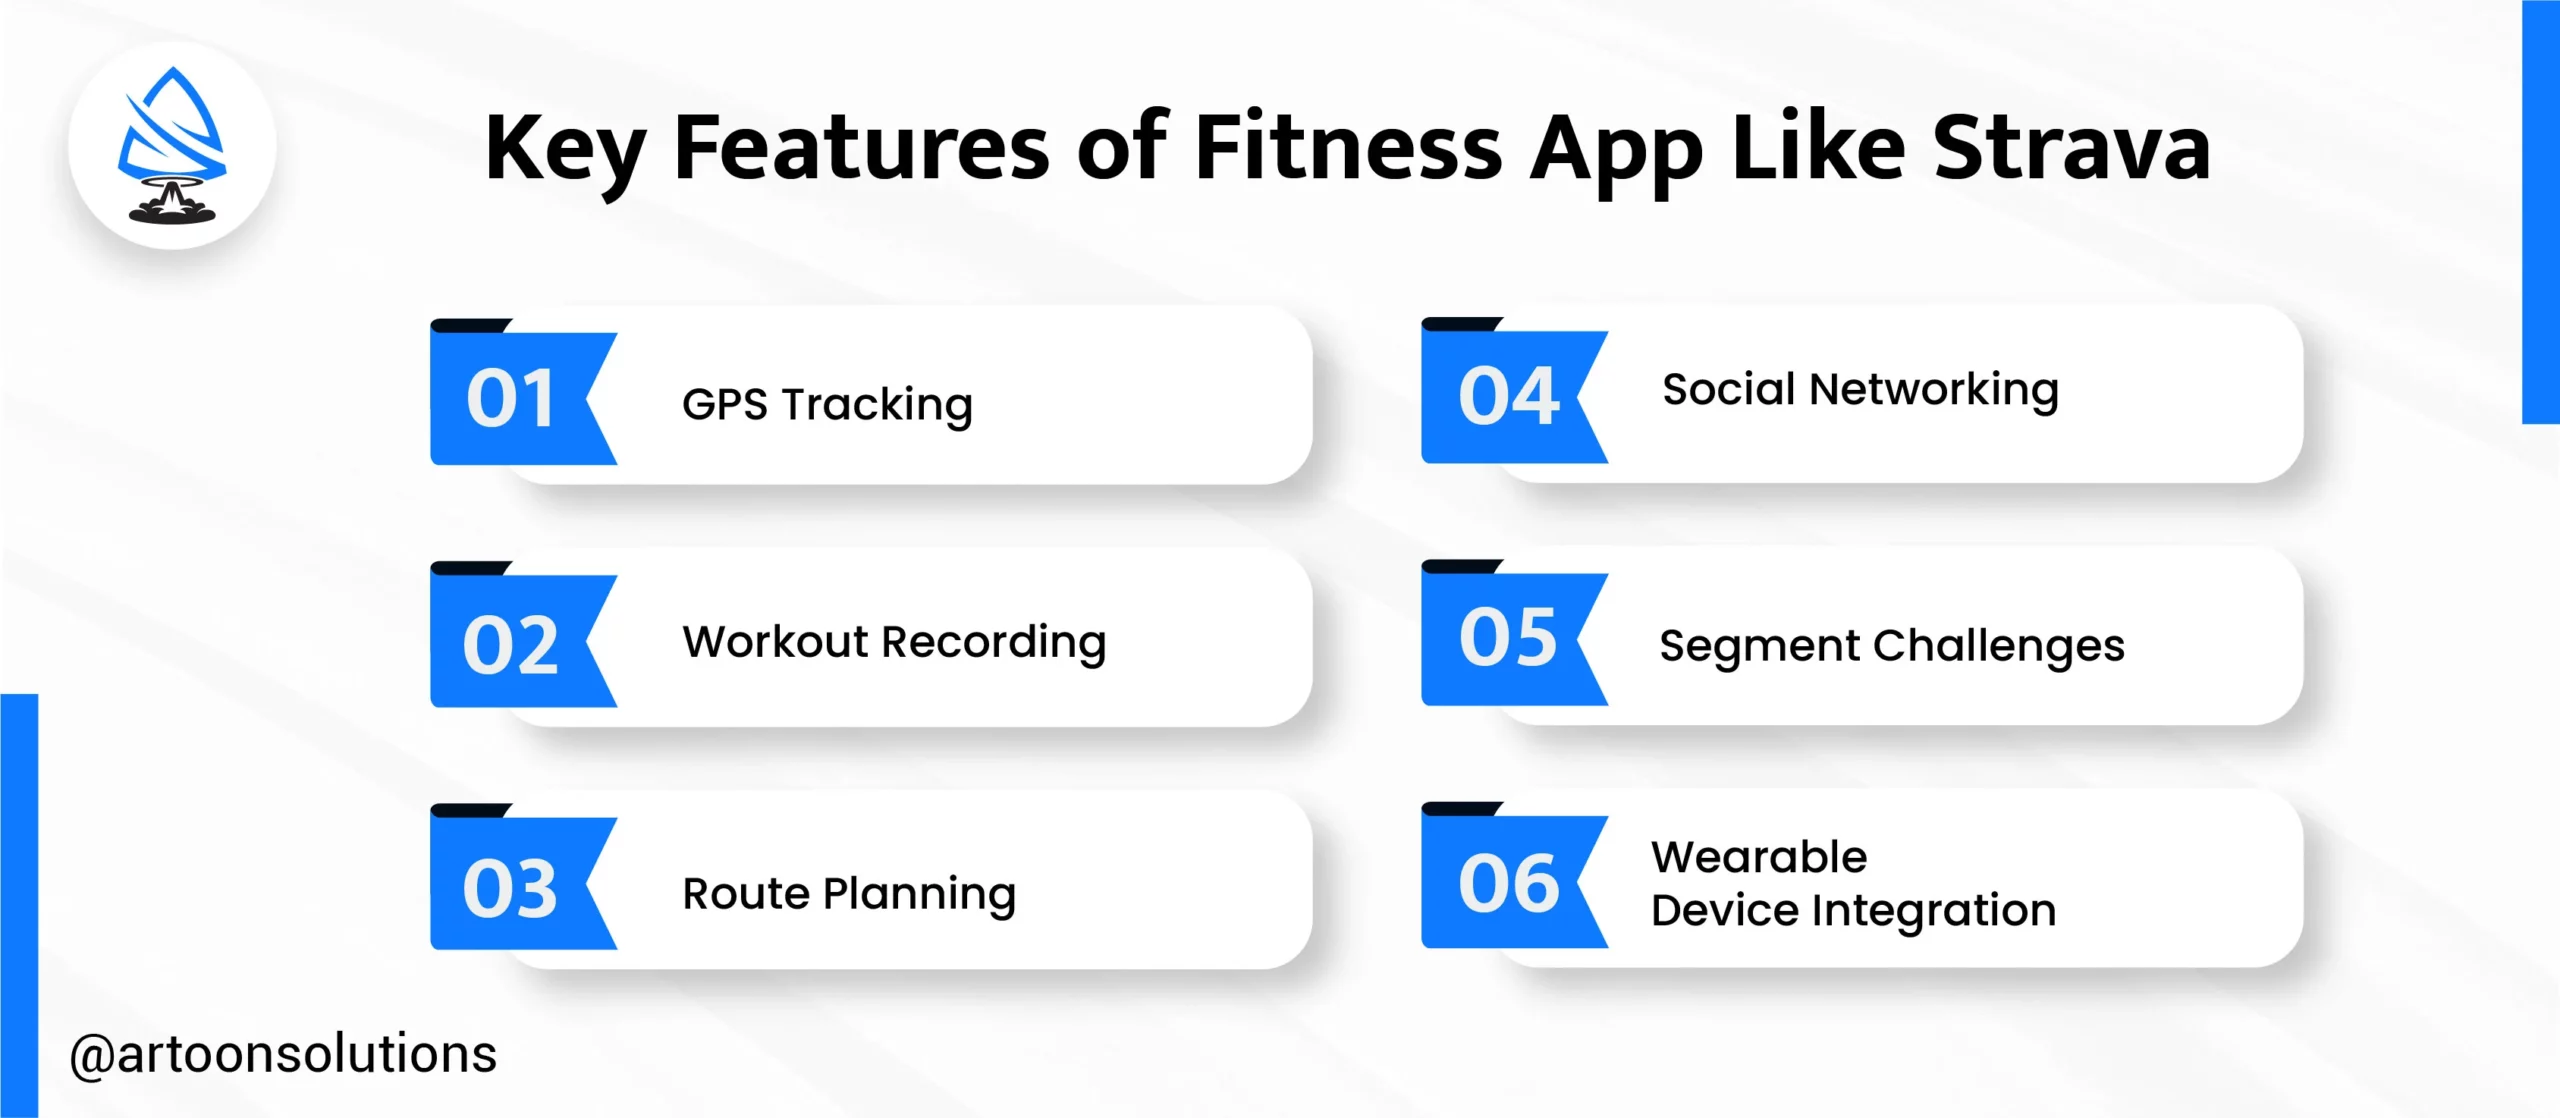 Key Features of a Fitness App Like Strava